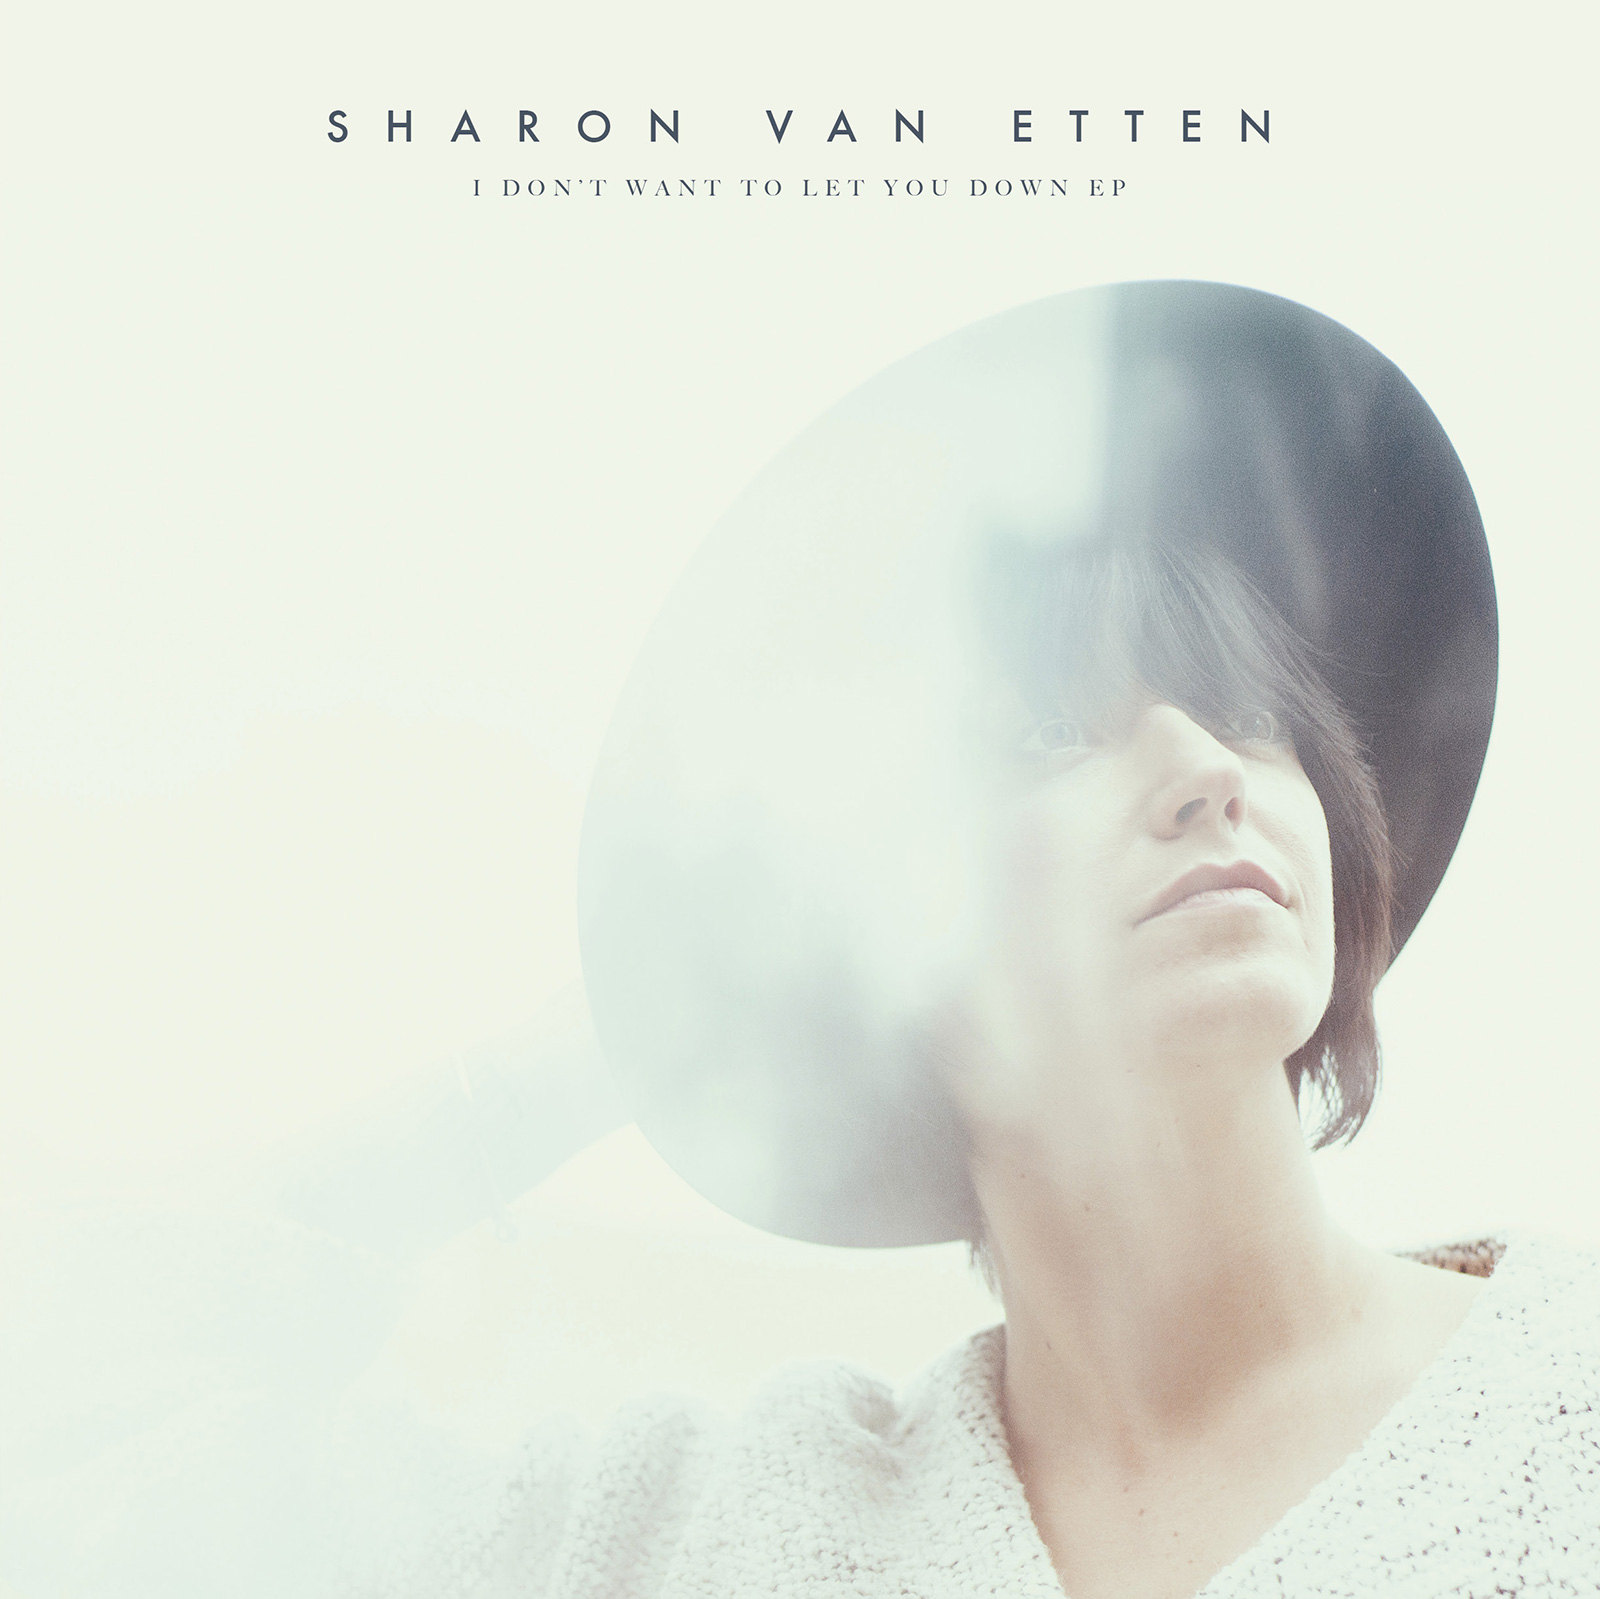 Sharon Van Etten: I Don't Want to Let You Down EP